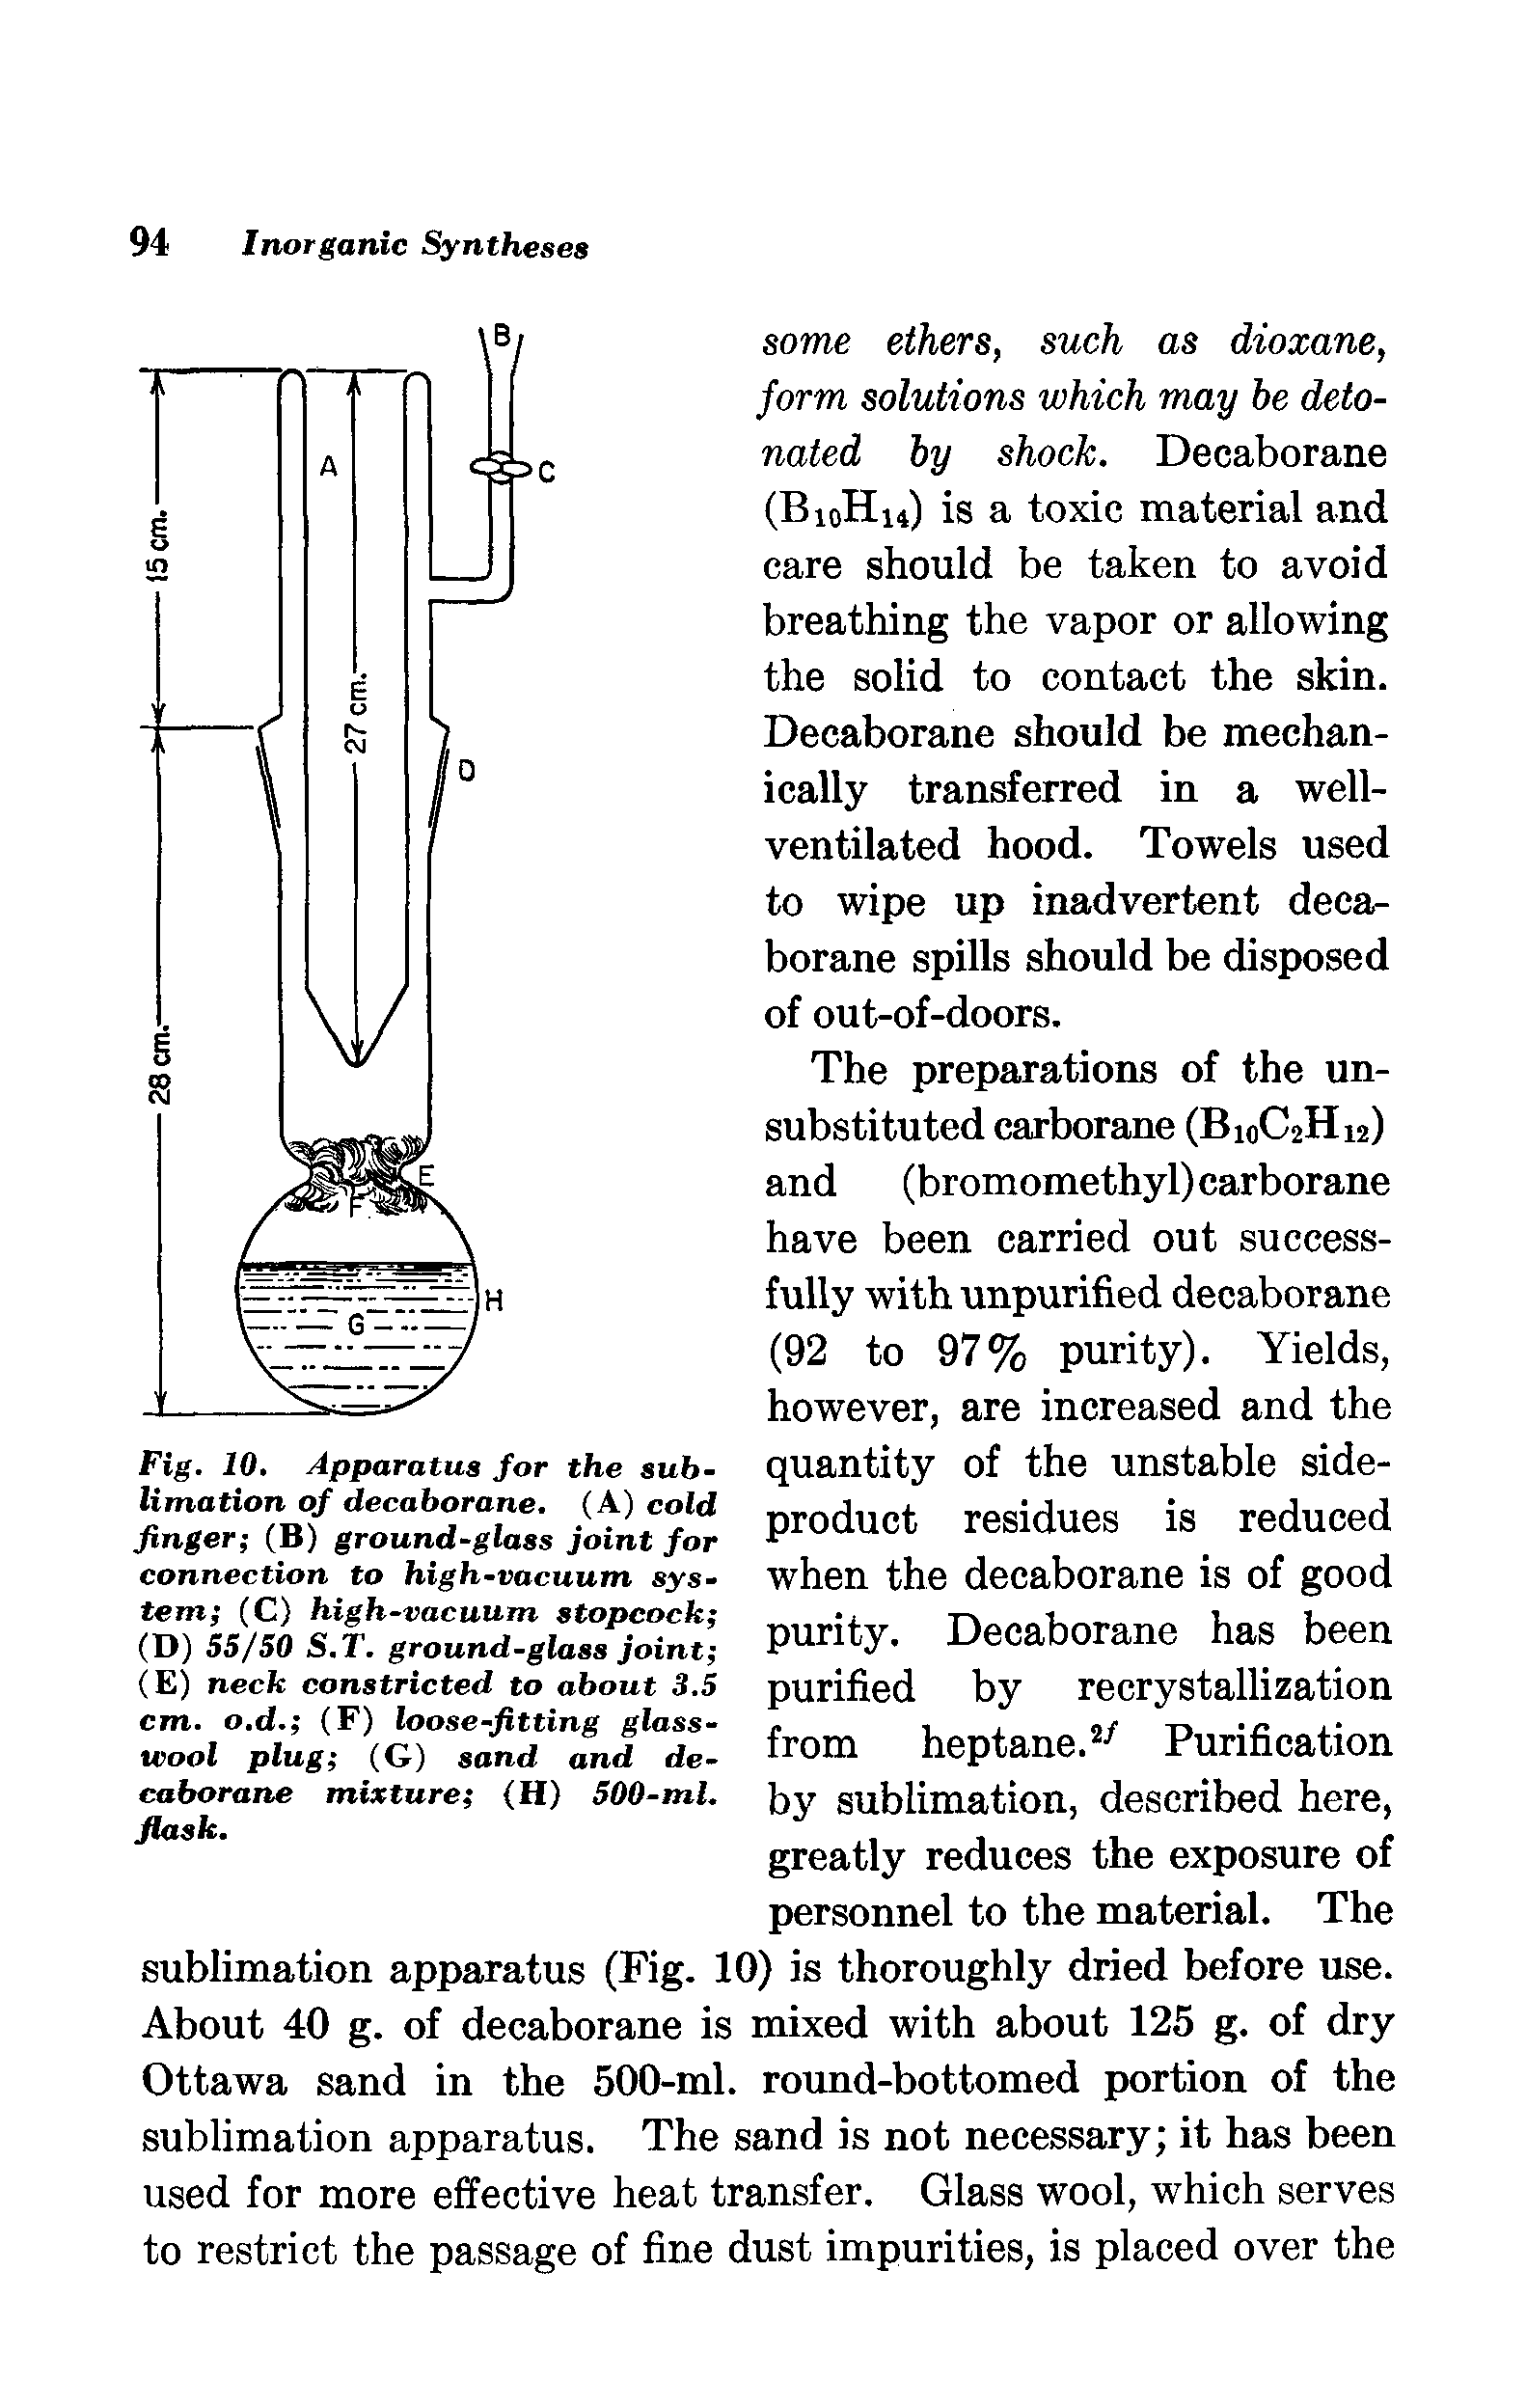 Fig. 10. Apparatus for the sublimation of decaborane. (A) cold finger (B) ground-glass joint for connection to high-vacuum system (C) high-vacuum stopcock ...